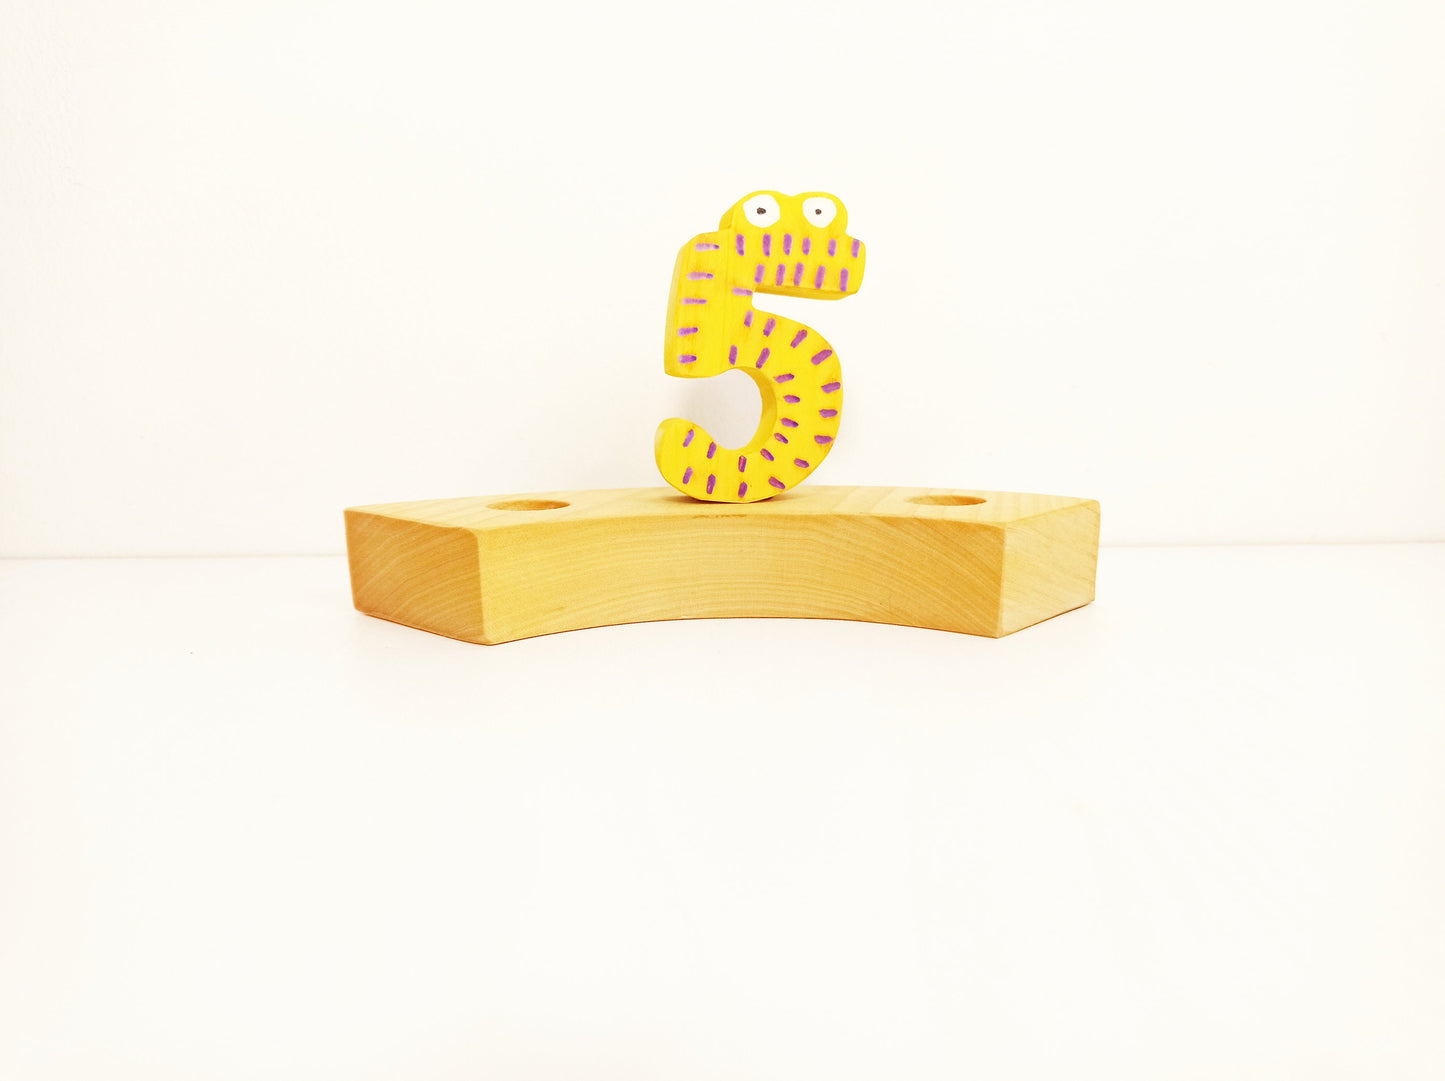 Number five with eyes celebration birthday ring ornament, waldorf wooden number 5 birthday decor, waldorf inspired birthday traditions